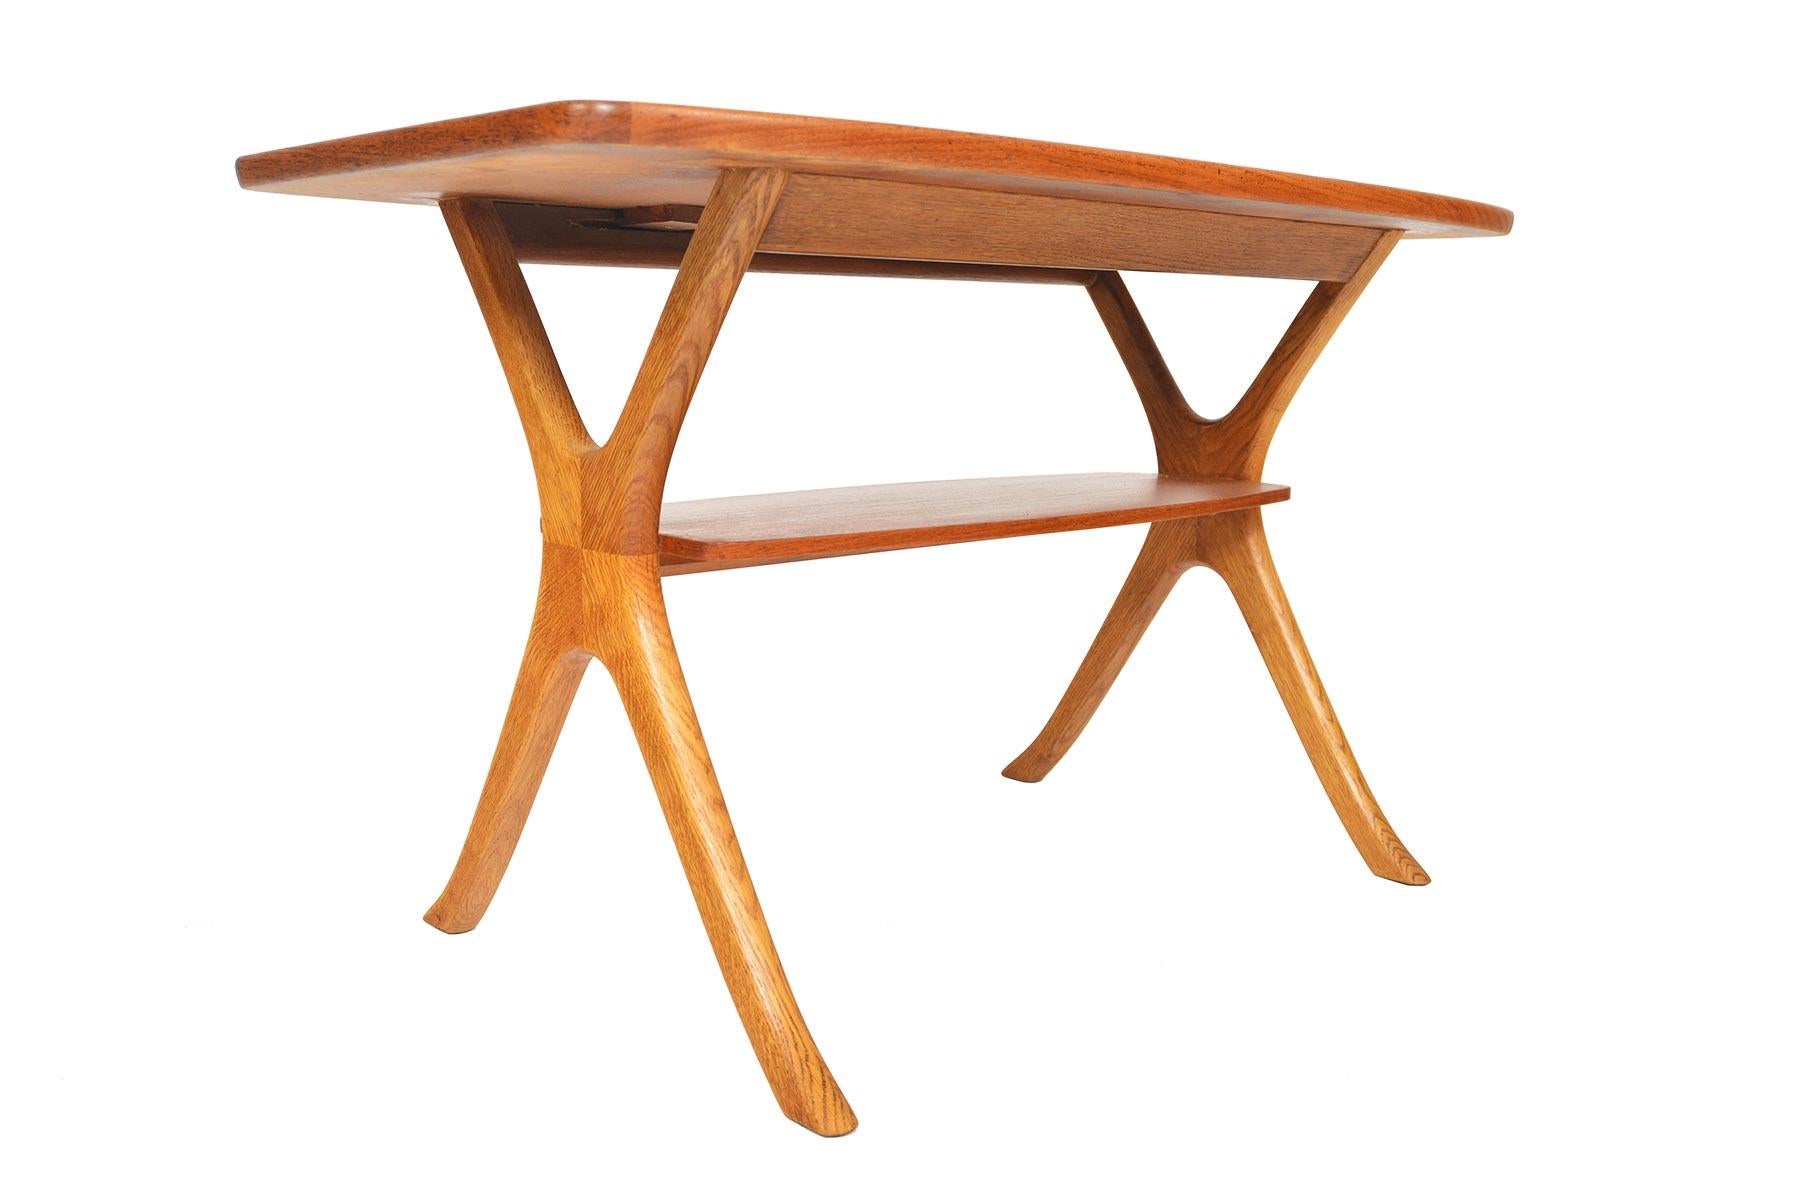 This Danish modern teak and oak coffee table offers a beautiful organic form. A raised lip runs the banding of the teak table top. Solid oak legs feature unique joinery and support a lower teak shelf. In excellent original condition.